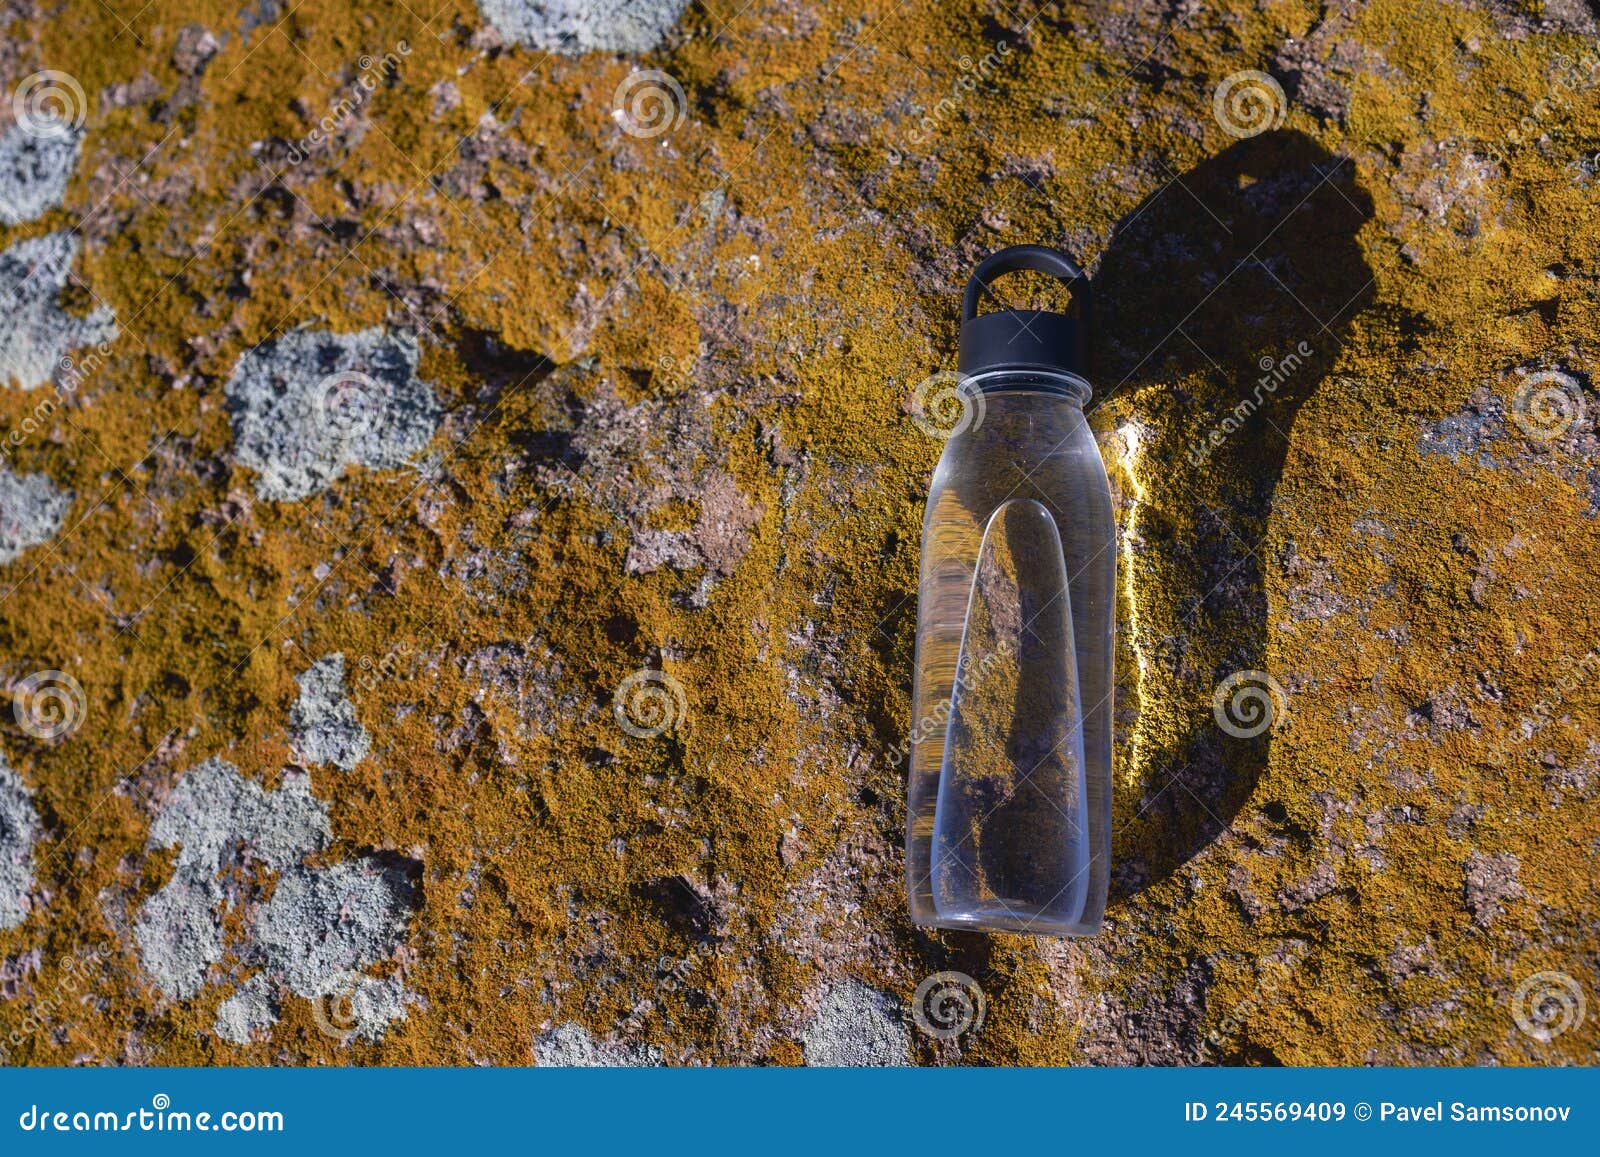 a bottle of water lies on a stone.